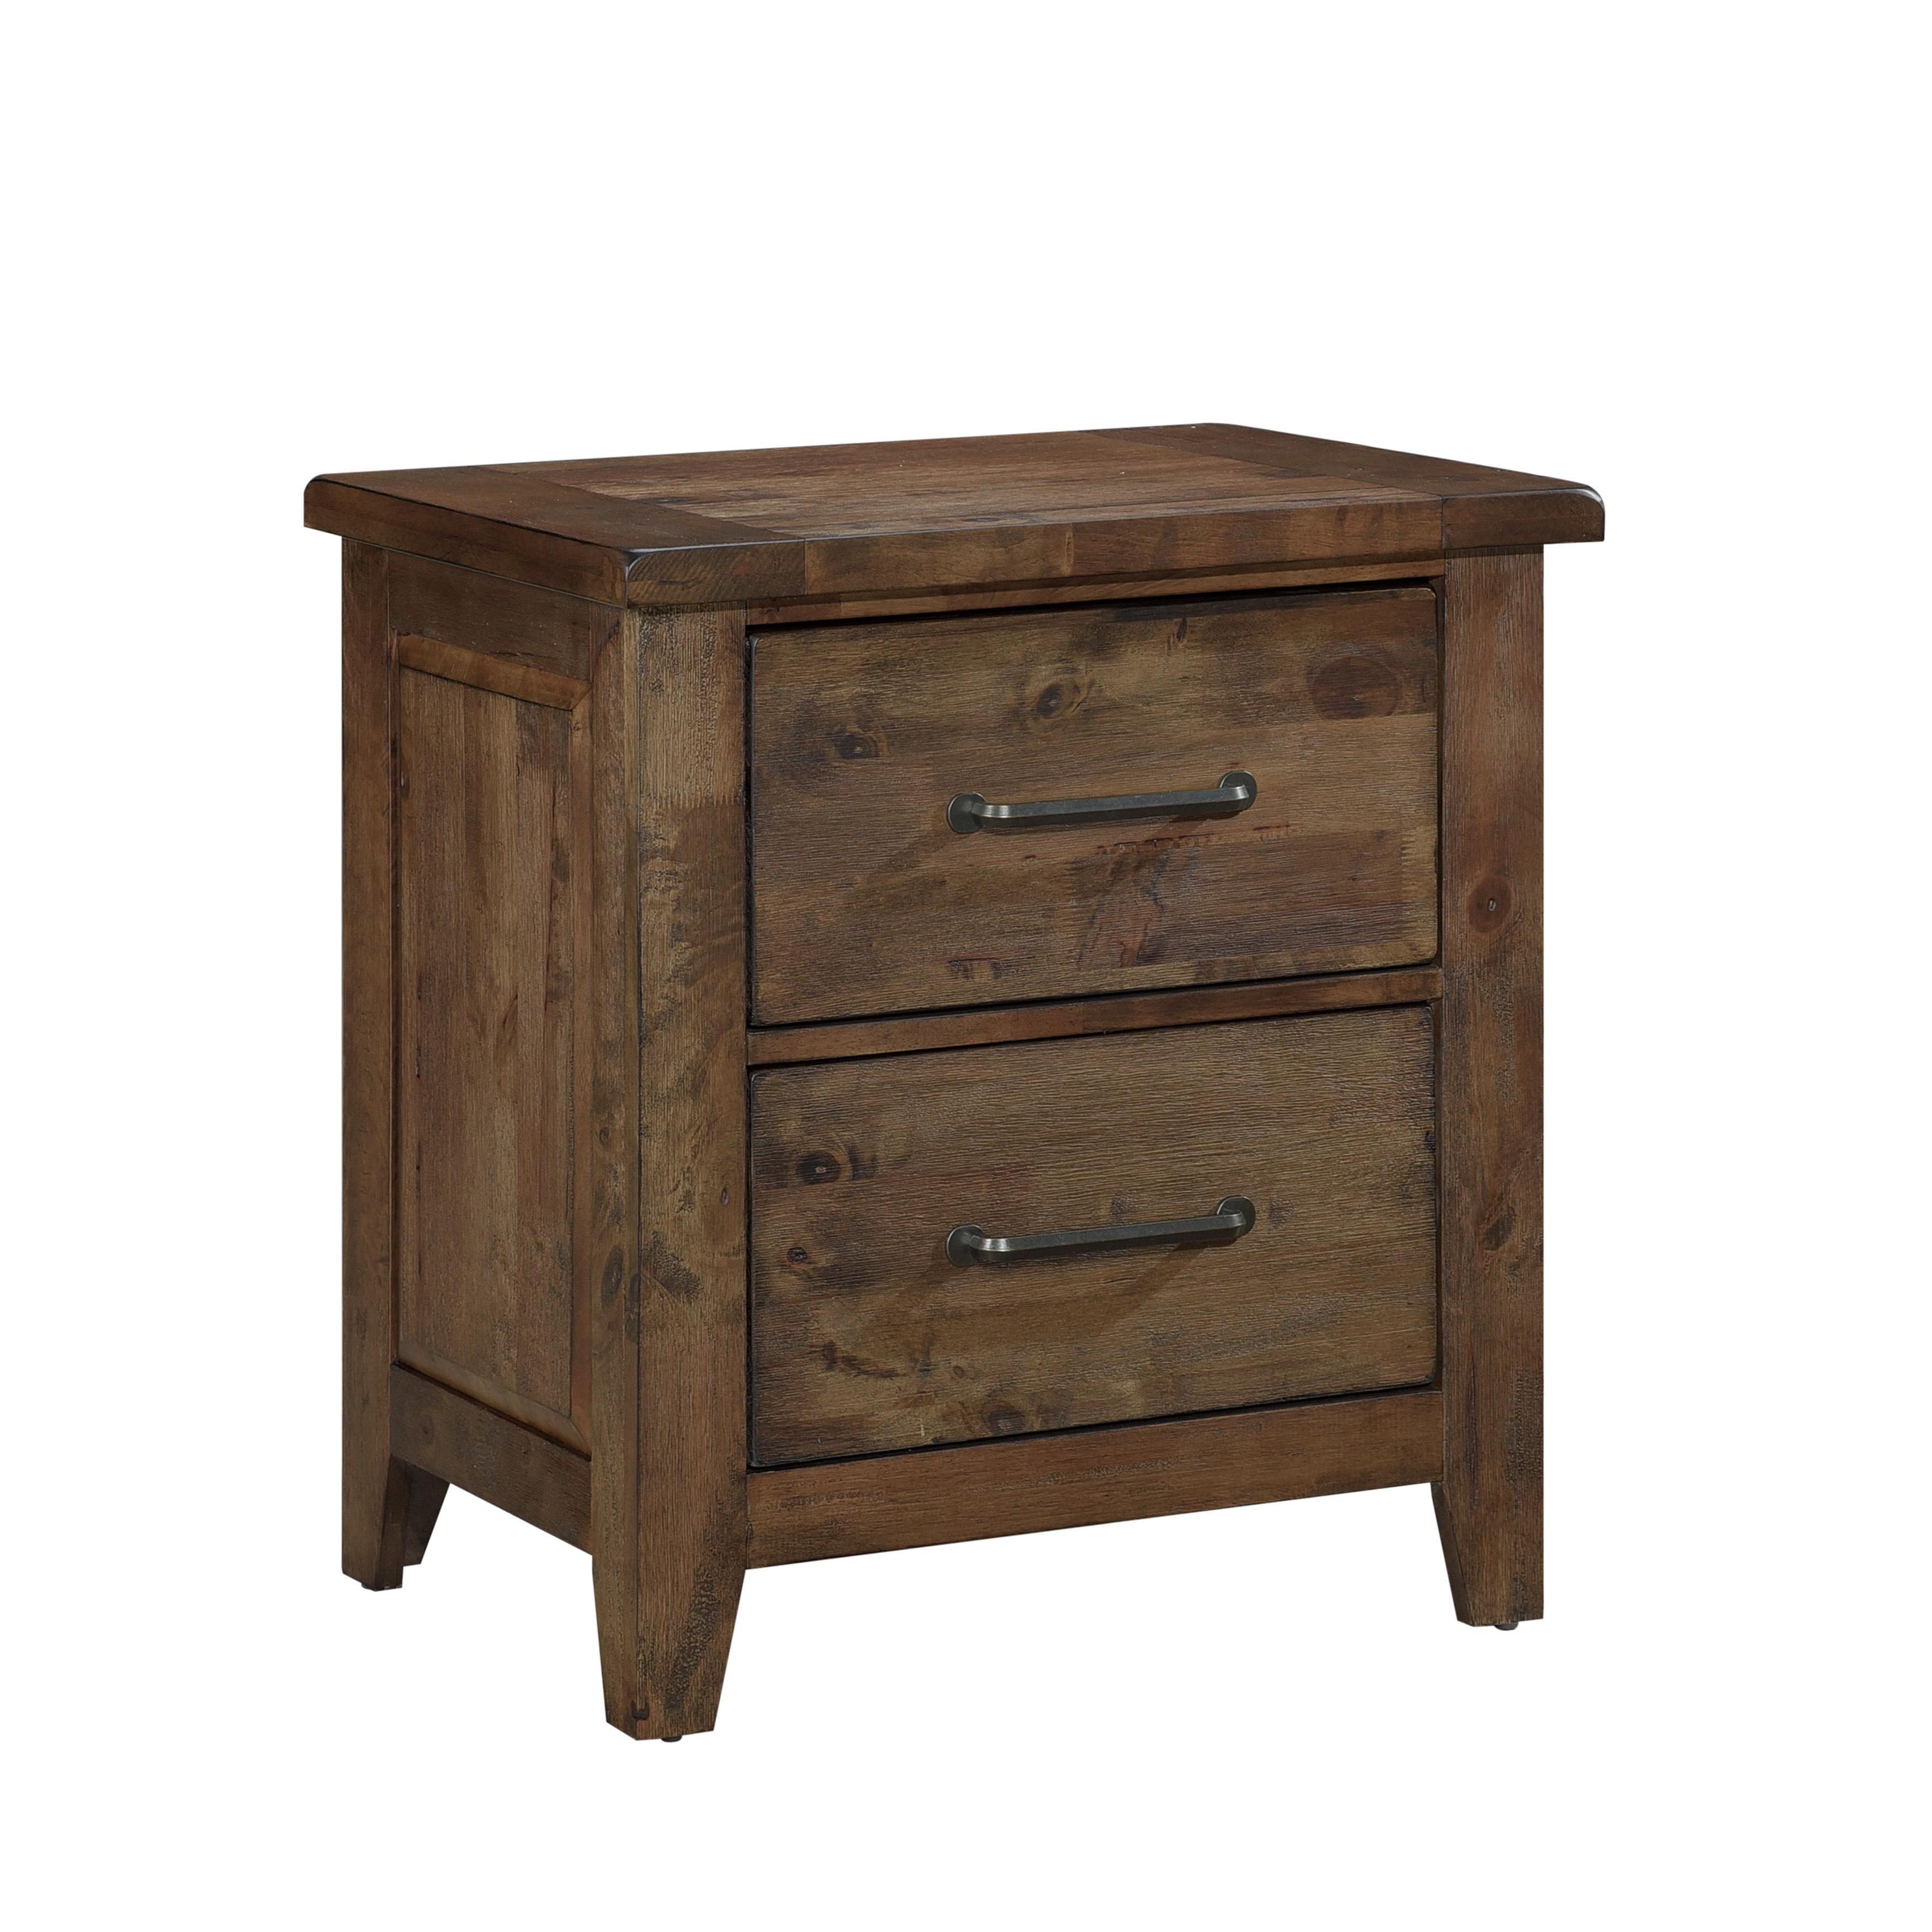 Transitional Nightstand 1957-4 Jerrick 1957-4 in Brown 